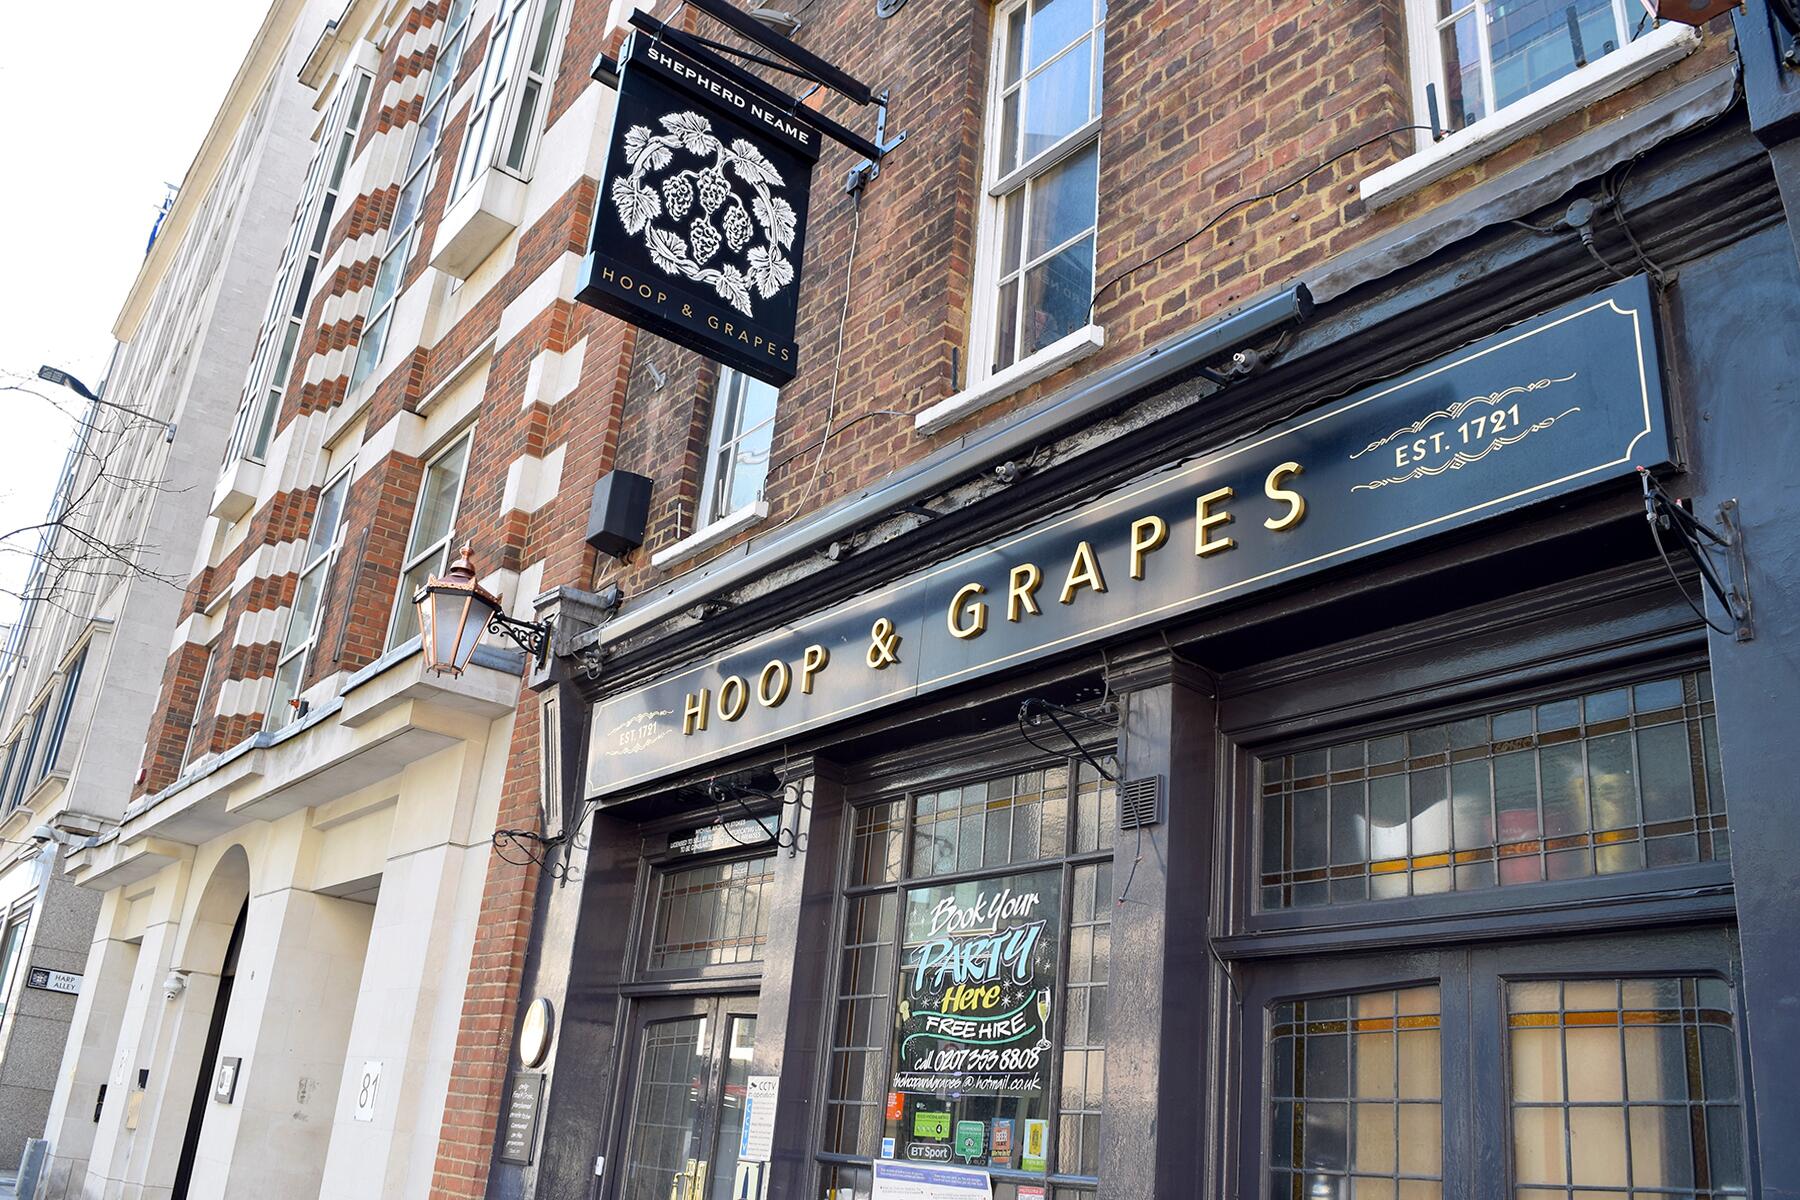 <a href='https://www.fodors.com/world/europe/england/london/experiences/news/photos/londons-best-oldest-pubs#'>From &quot;Drink Thy Fill at 12 of London’s Oldest Pubs: Hoop & Grapes&quot;</a>